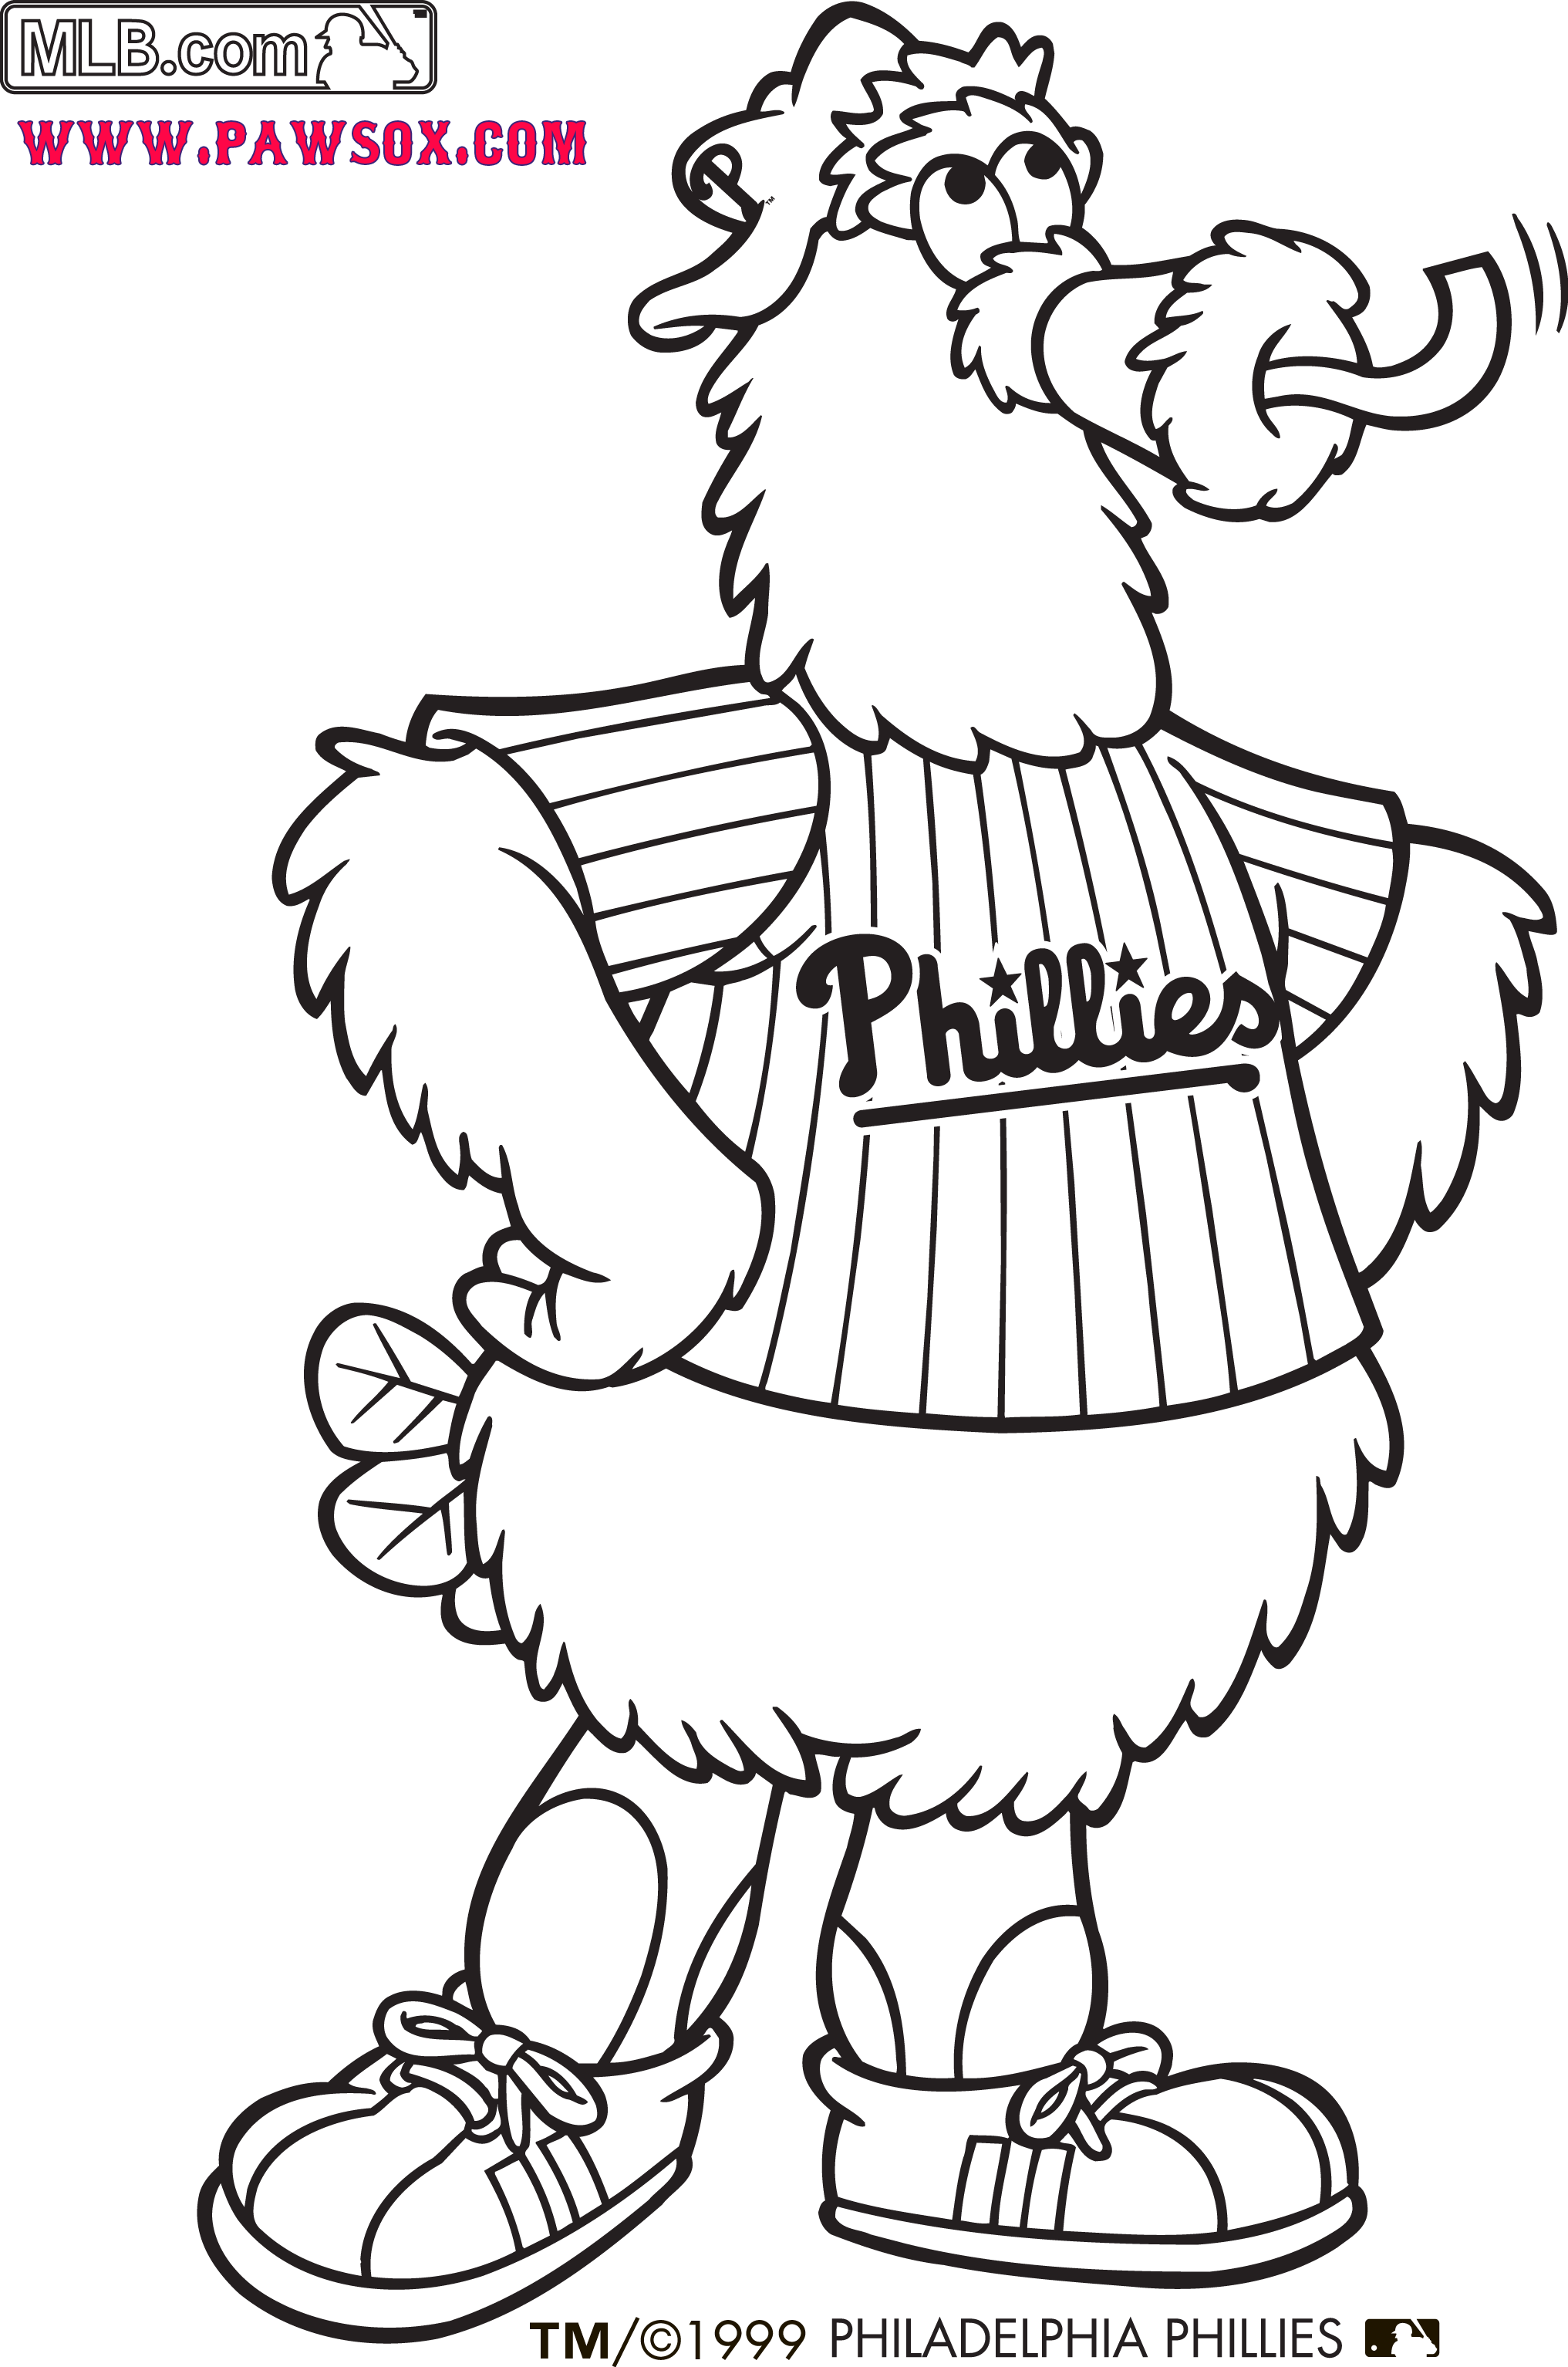 Phillies Phanatic Coloring Page